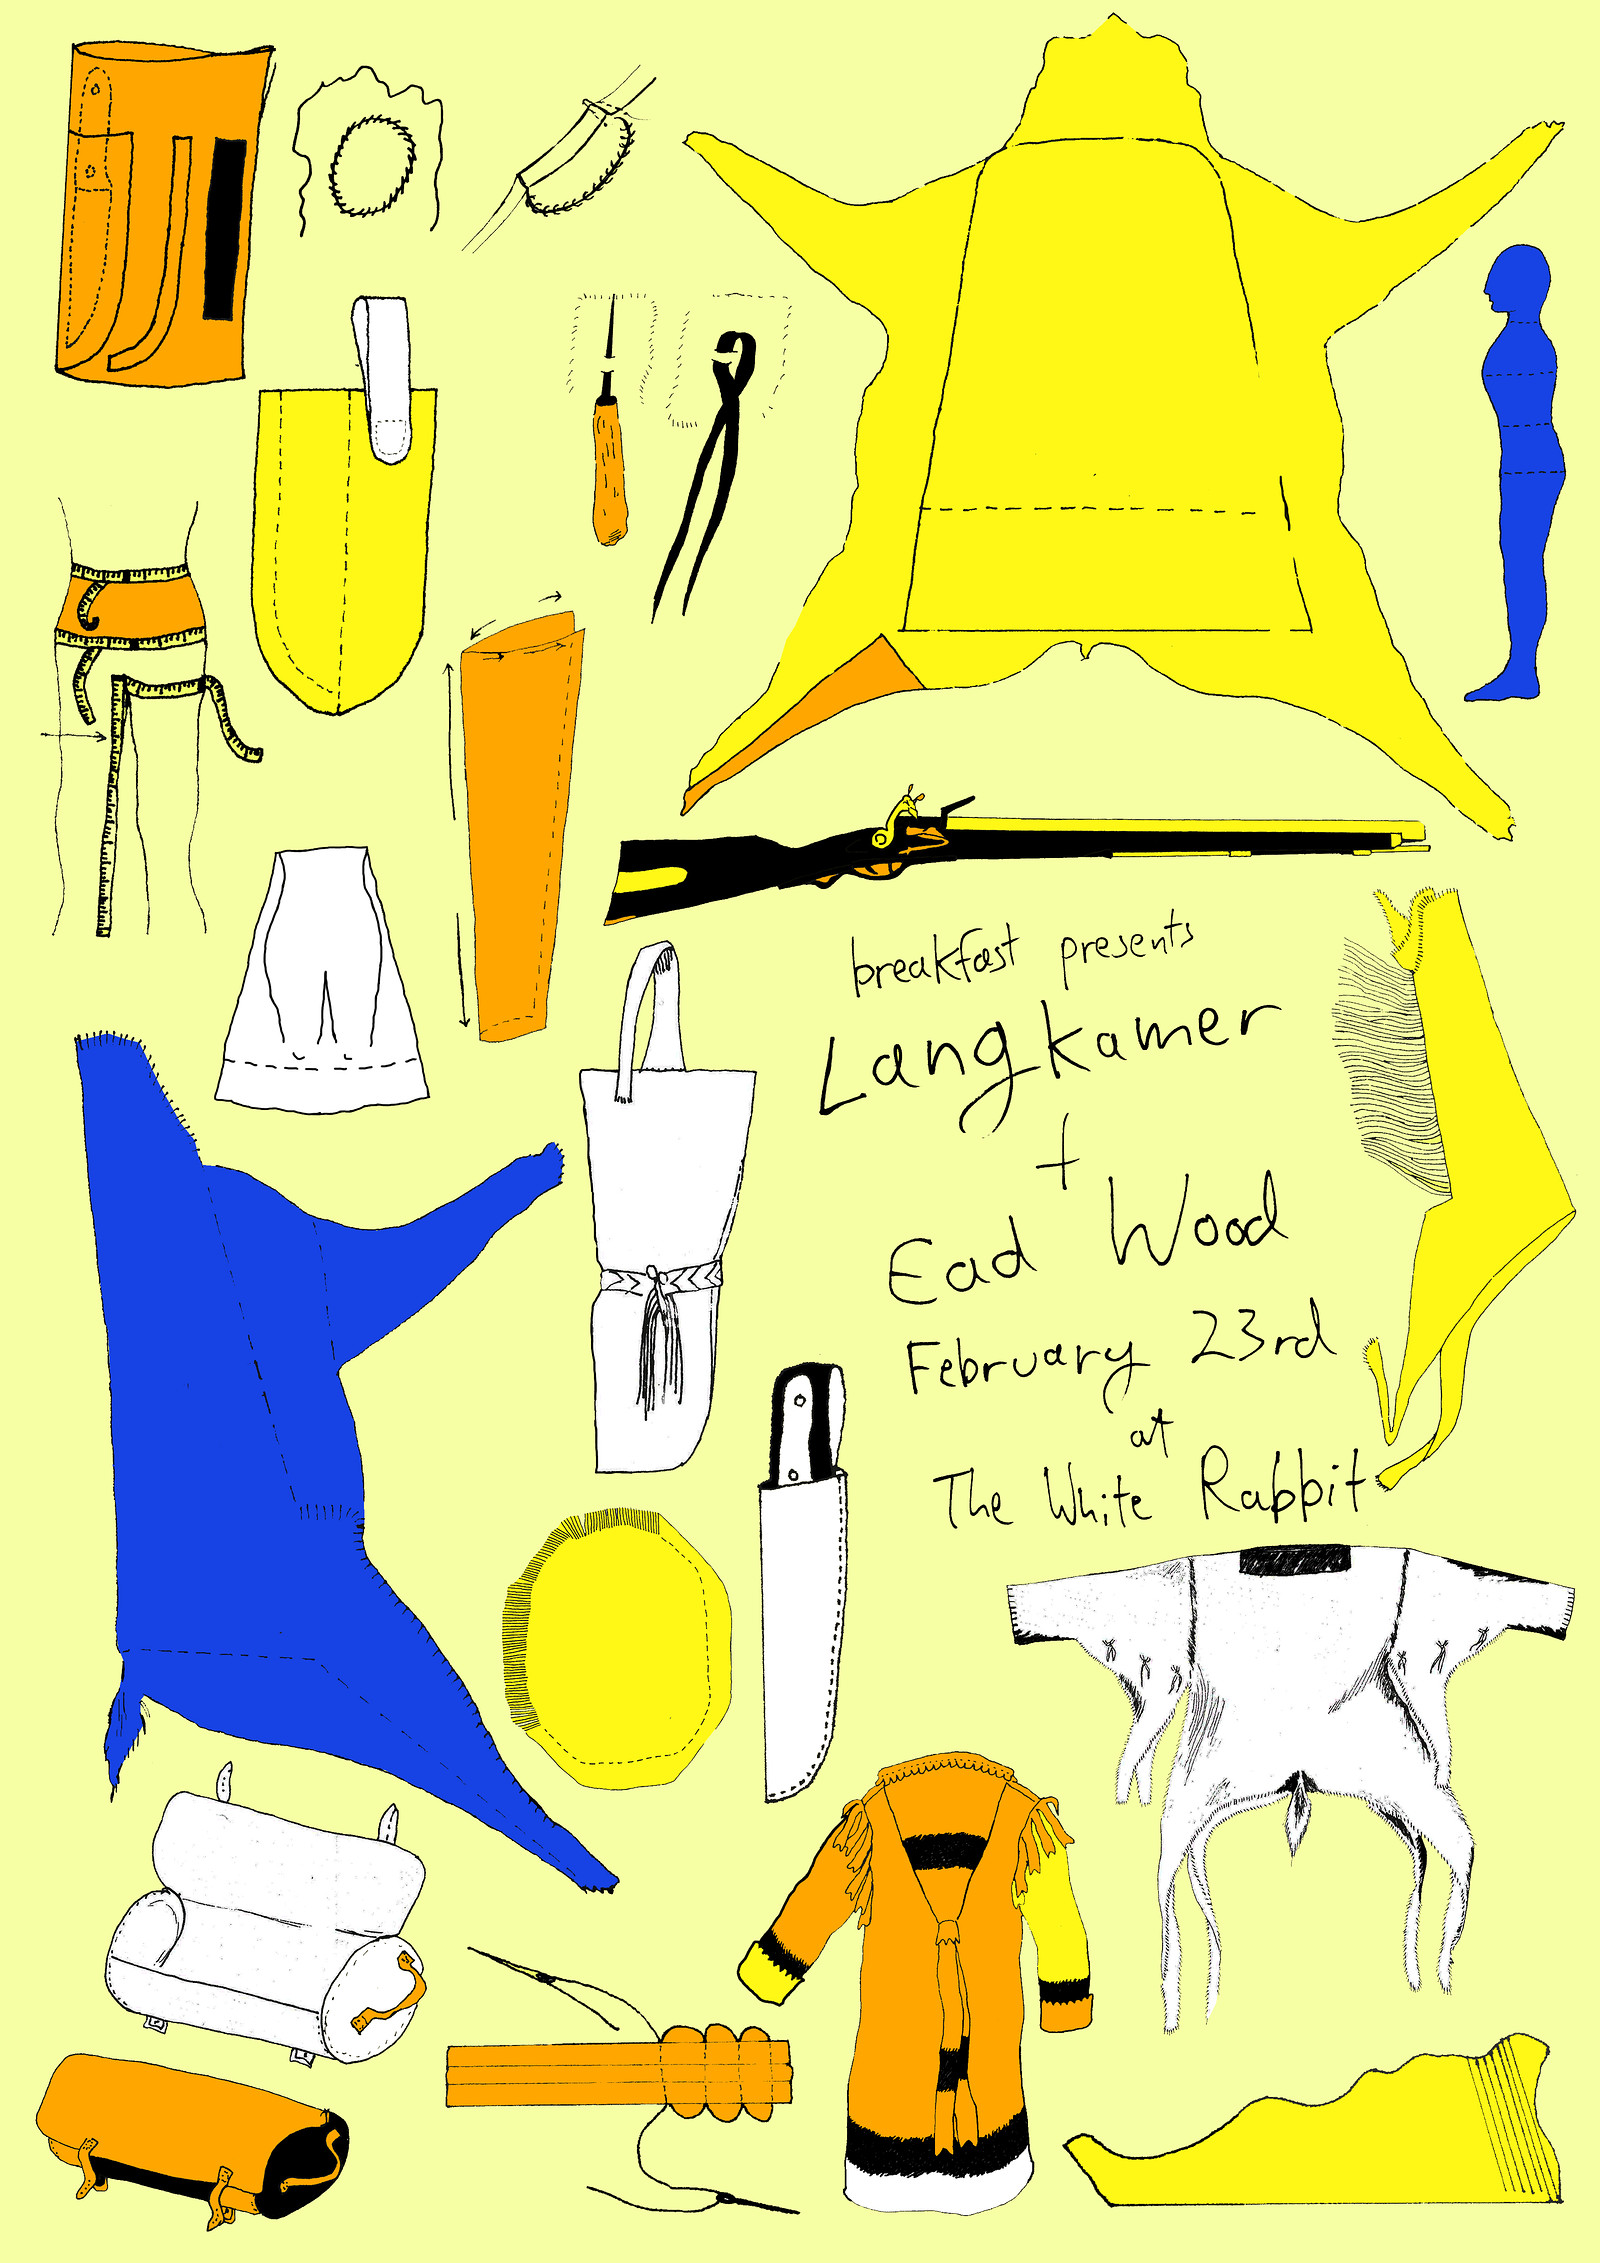 Breakfast Records presents Langkamer + Ead Wood at The White Rabbit